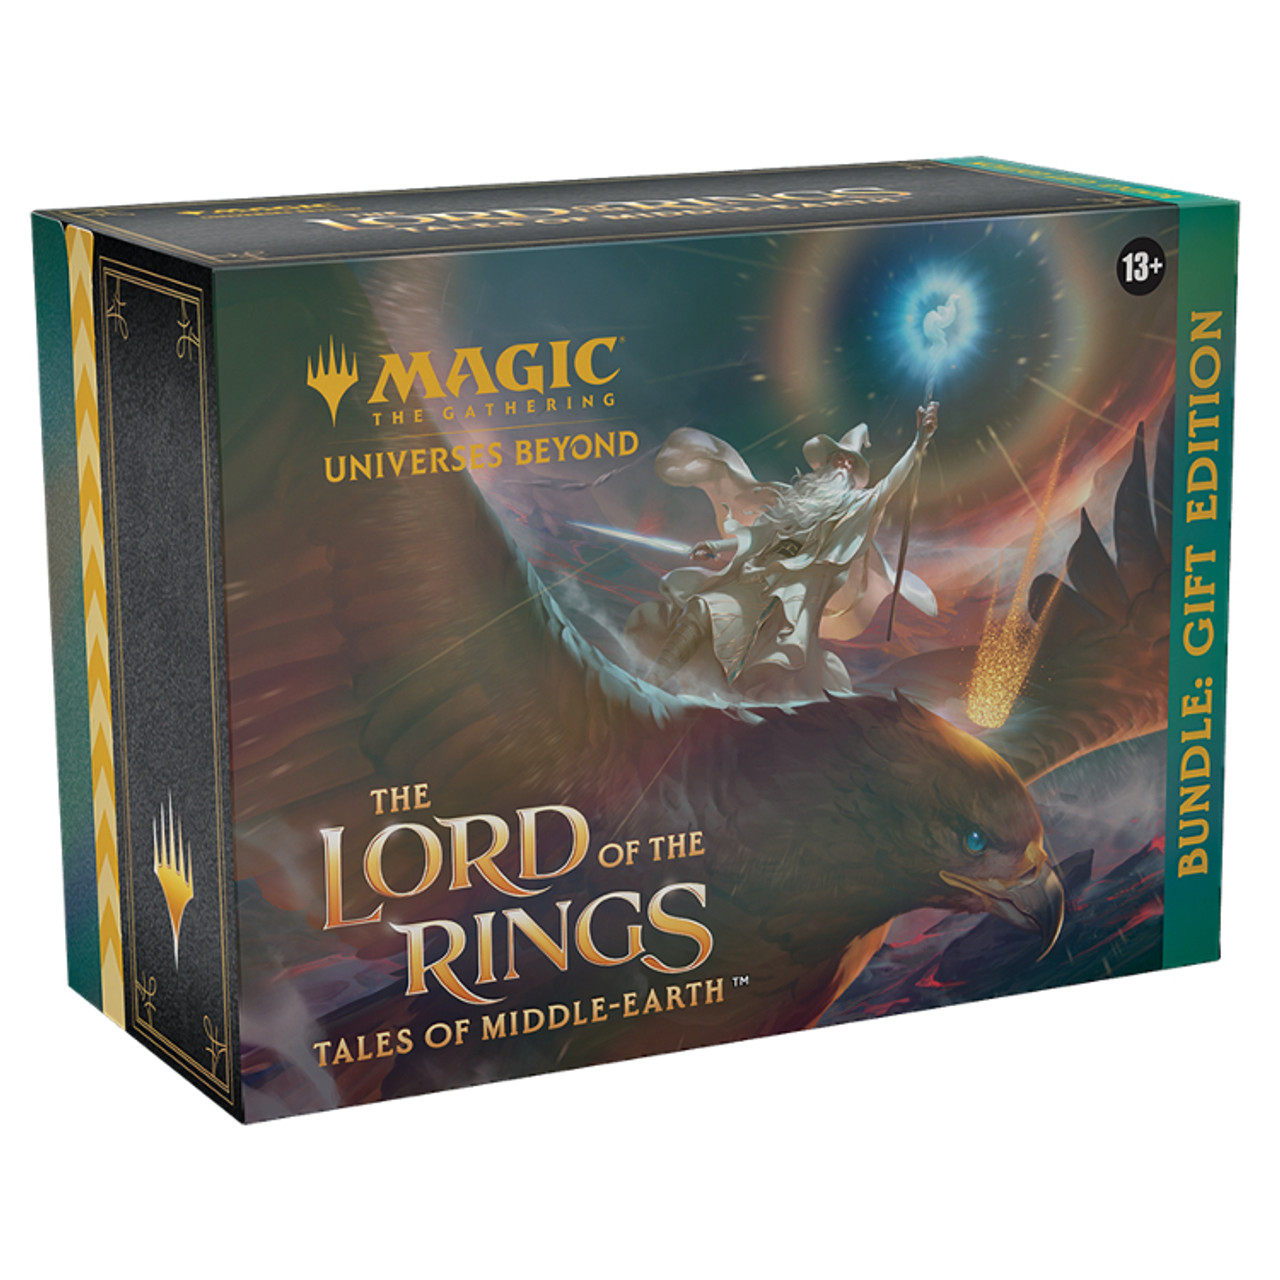 Limited guide to LOTR: Tales of Middle-earth - MTG